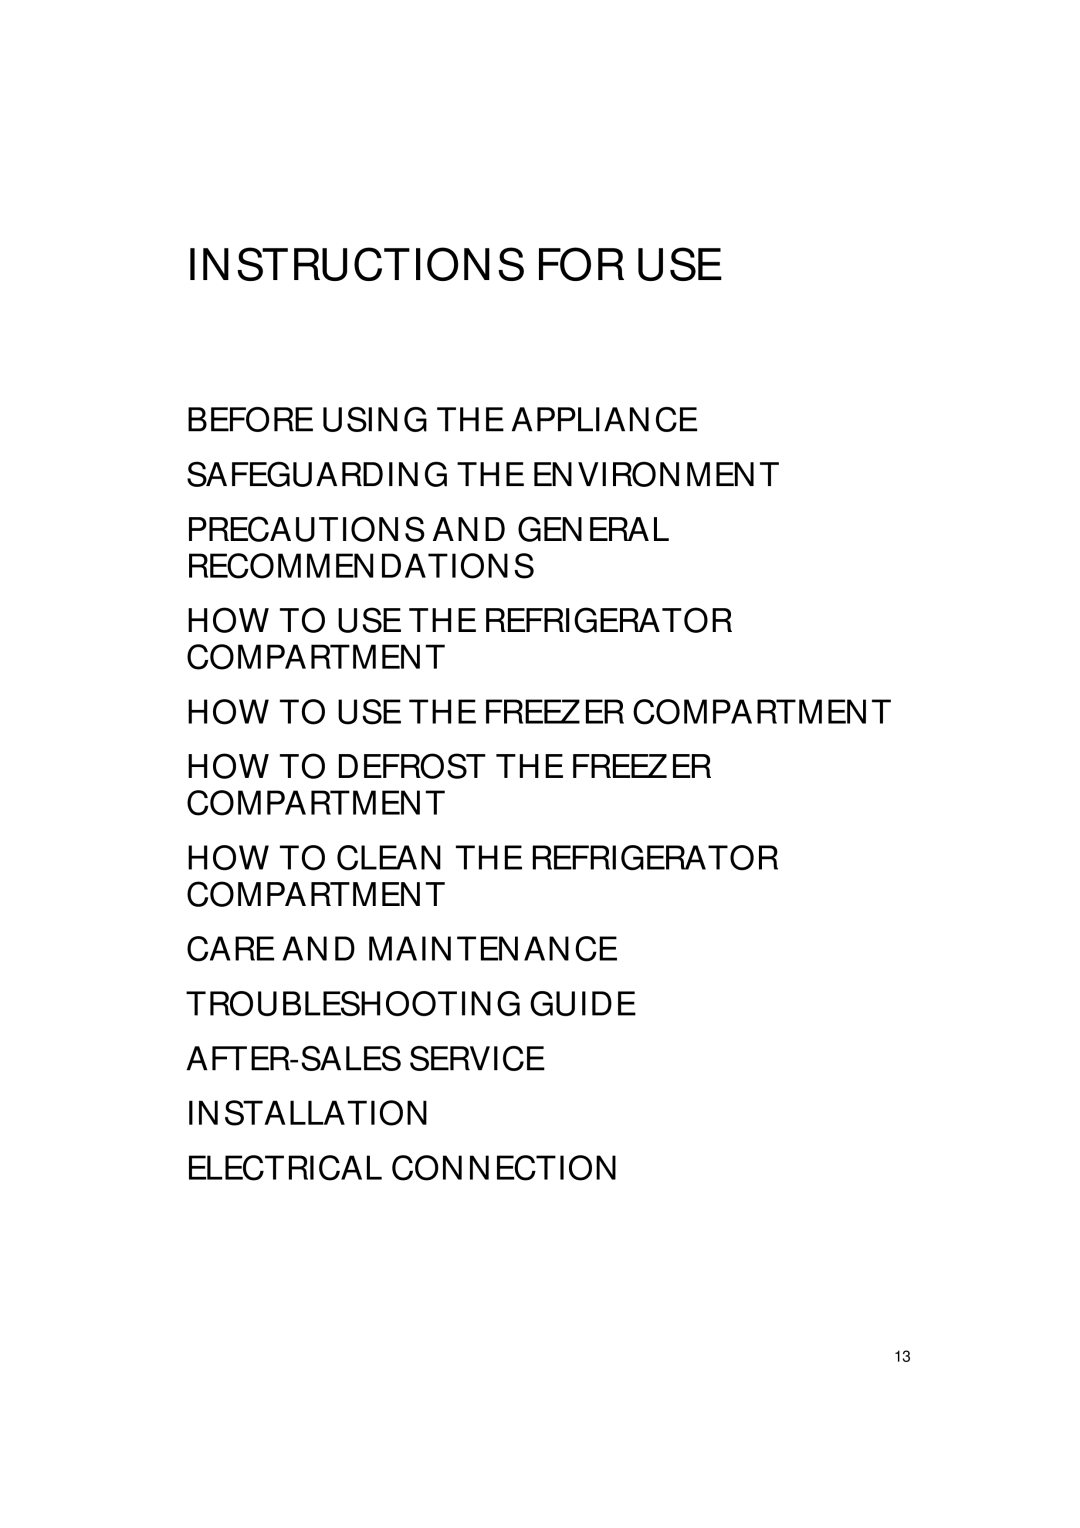 Smeg CR327AV1 manual Before Using The Appliance Safeguarding The Environment, Precautions And General Recommendations 